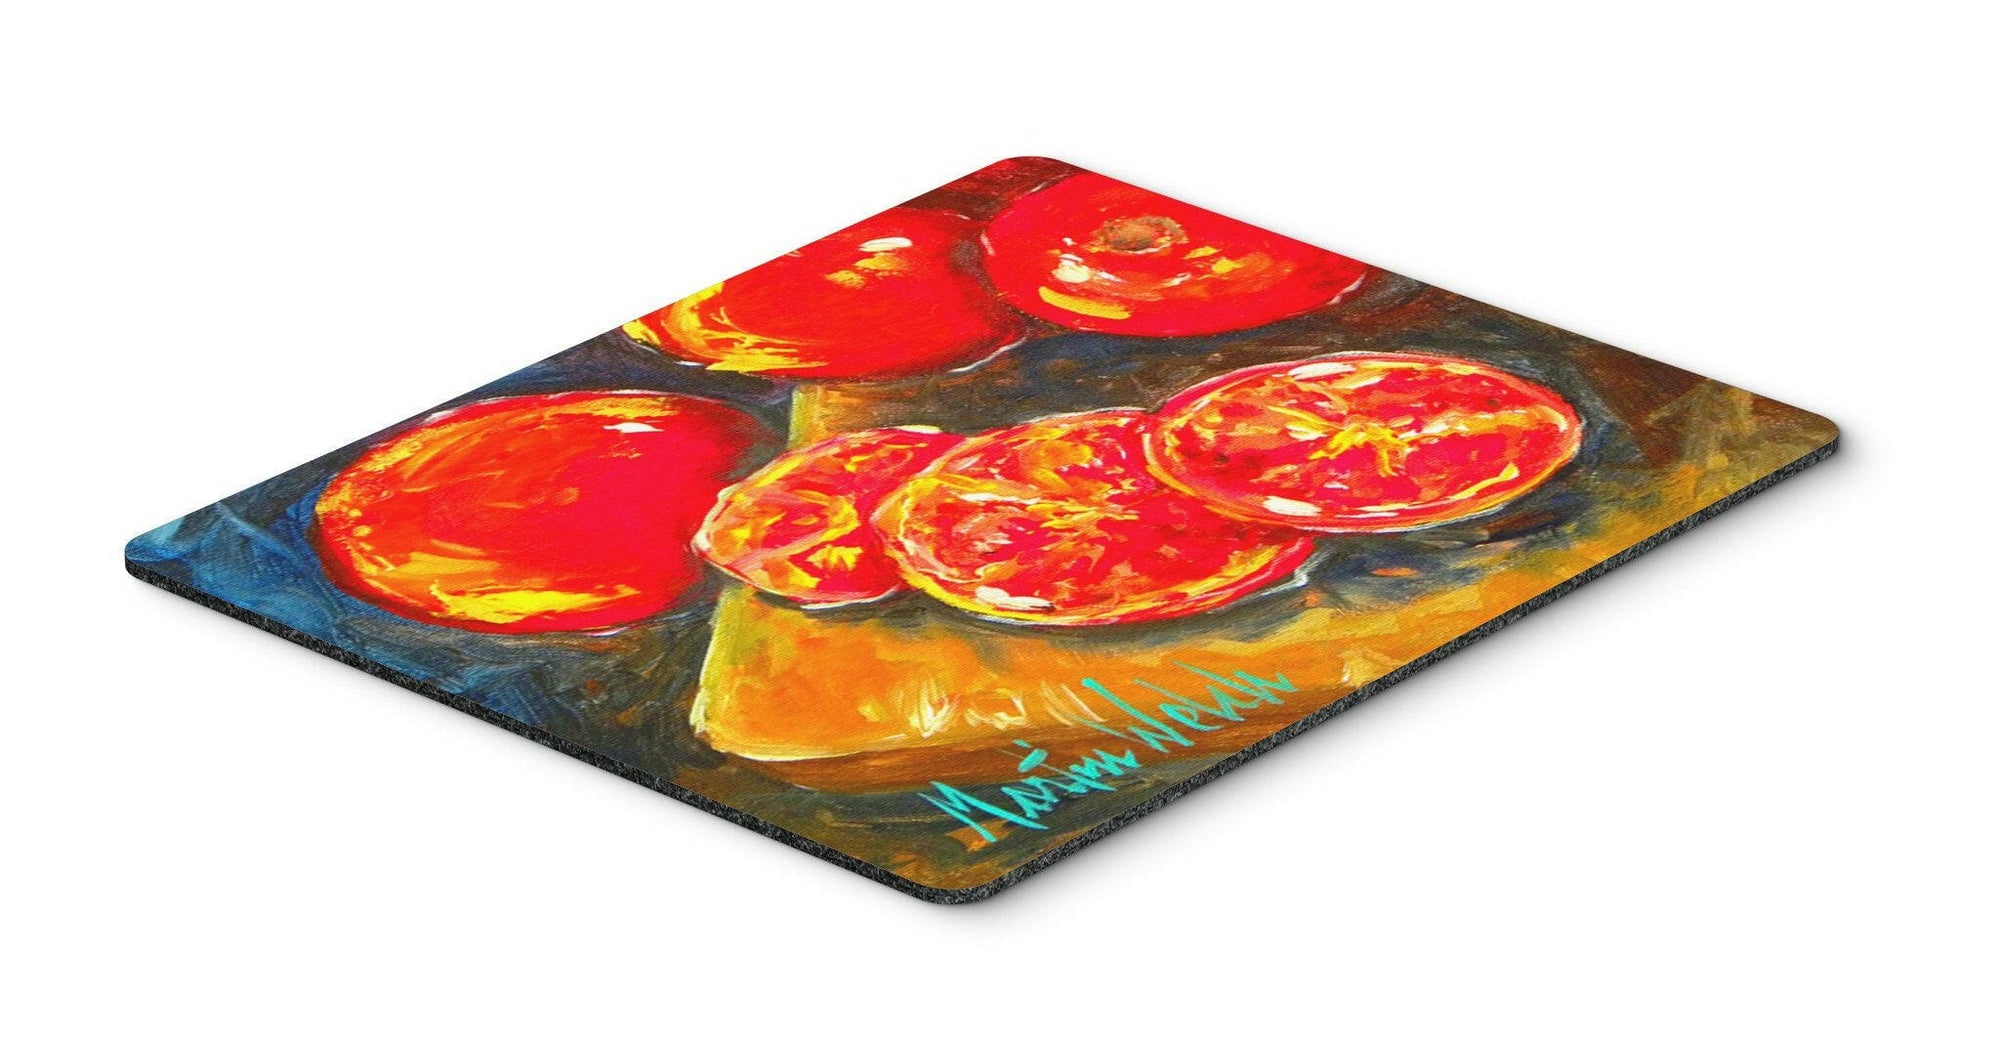 Vegetables - Tomatoes Slice It Up Mouse Pad, Hot Pad or Trivet by Caroline's Treasures